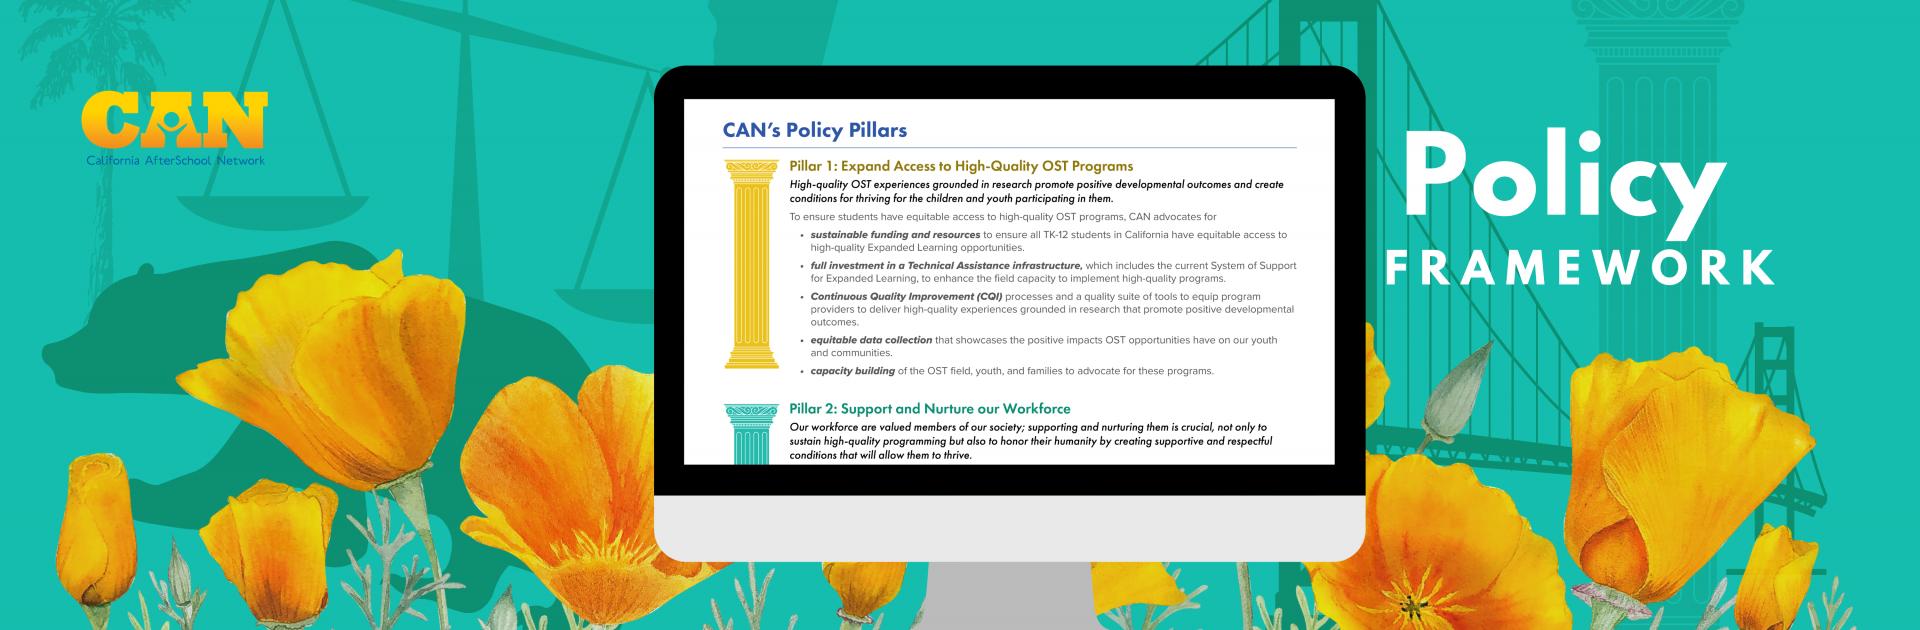 Desktop computer with image of CAN's policy pillars with Policy Framework words and California poppies, Golden Gate Bridge, justice scale, and bear in the background